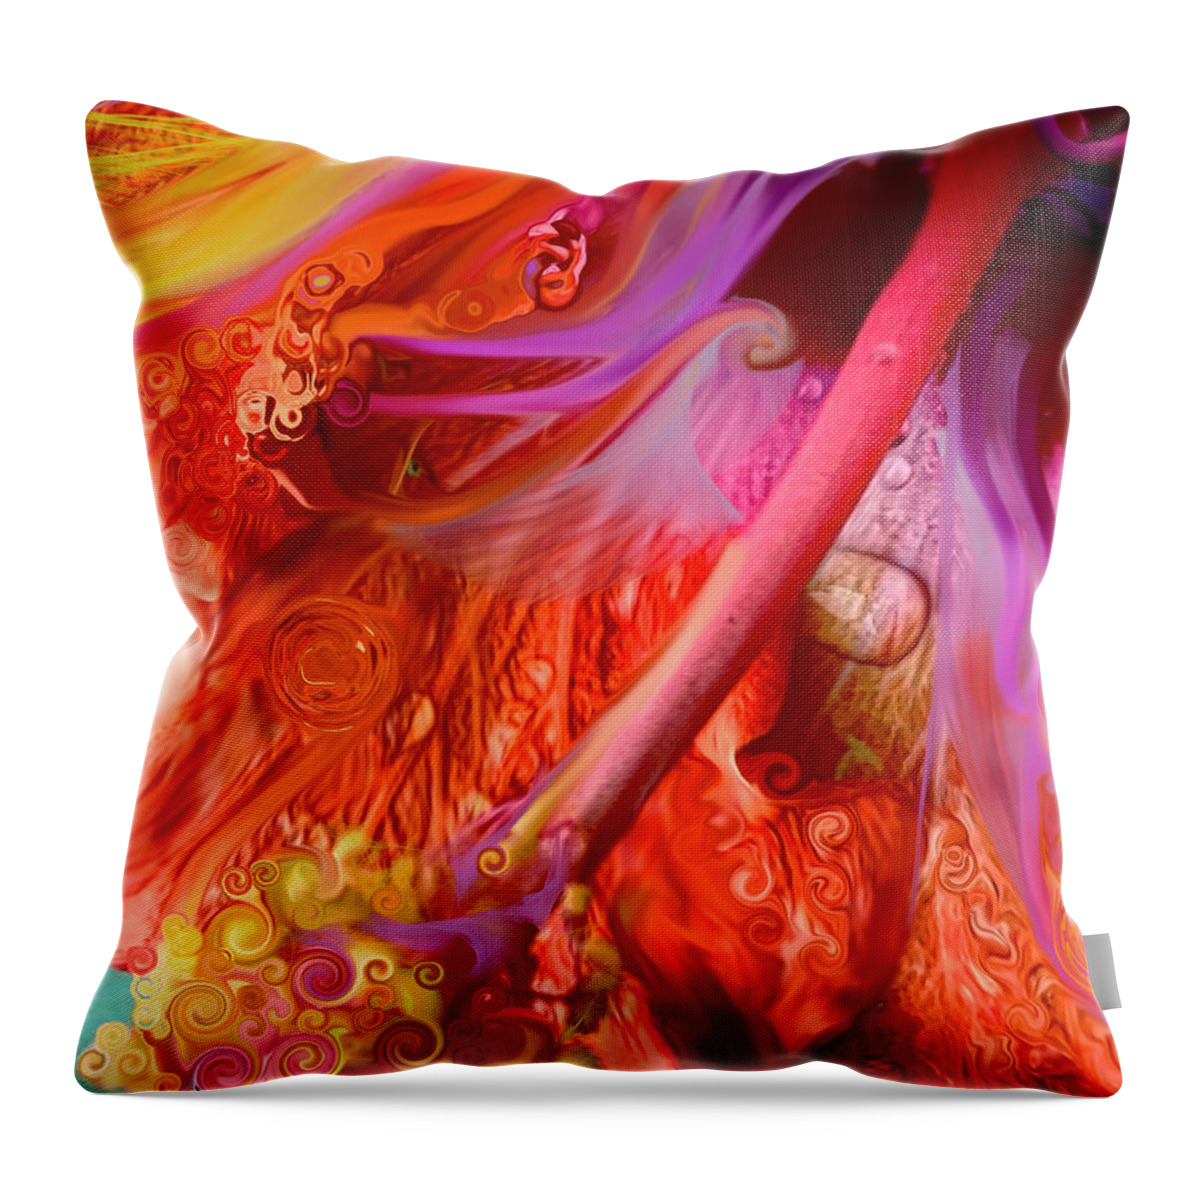 Abstract Flower Throw Pillow featuring the digital art Laughing Hibiscus by Cindy Greenstein